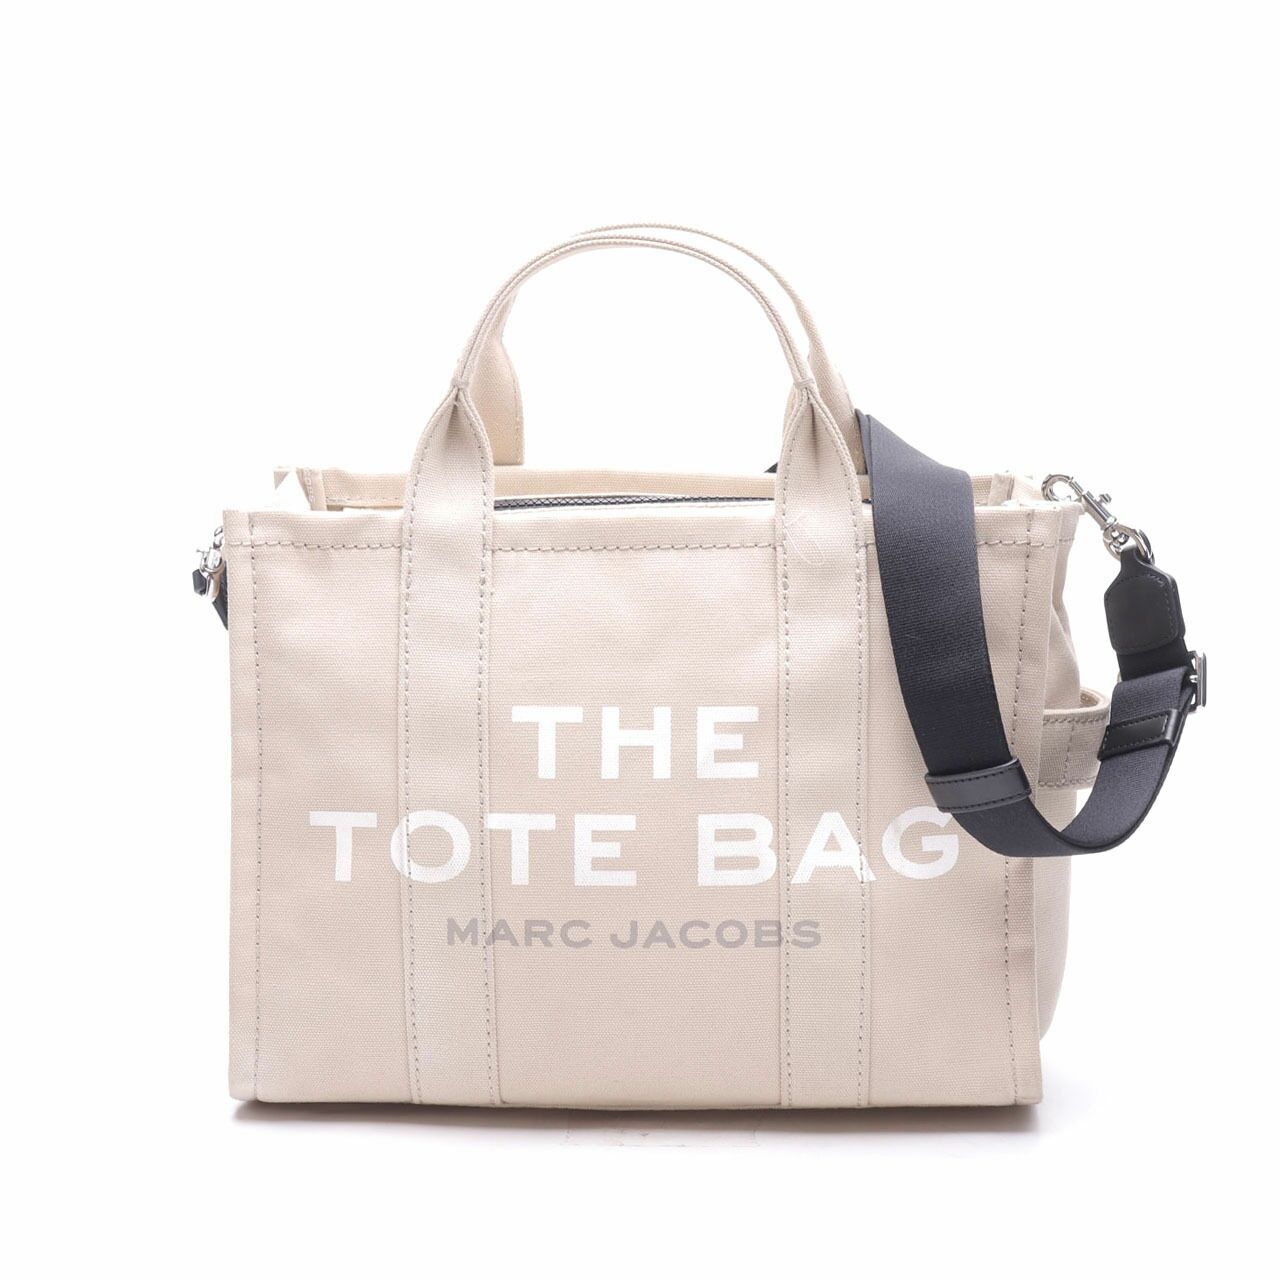 Marc Jacobs Beige Small The Tote Bag Tote Bag